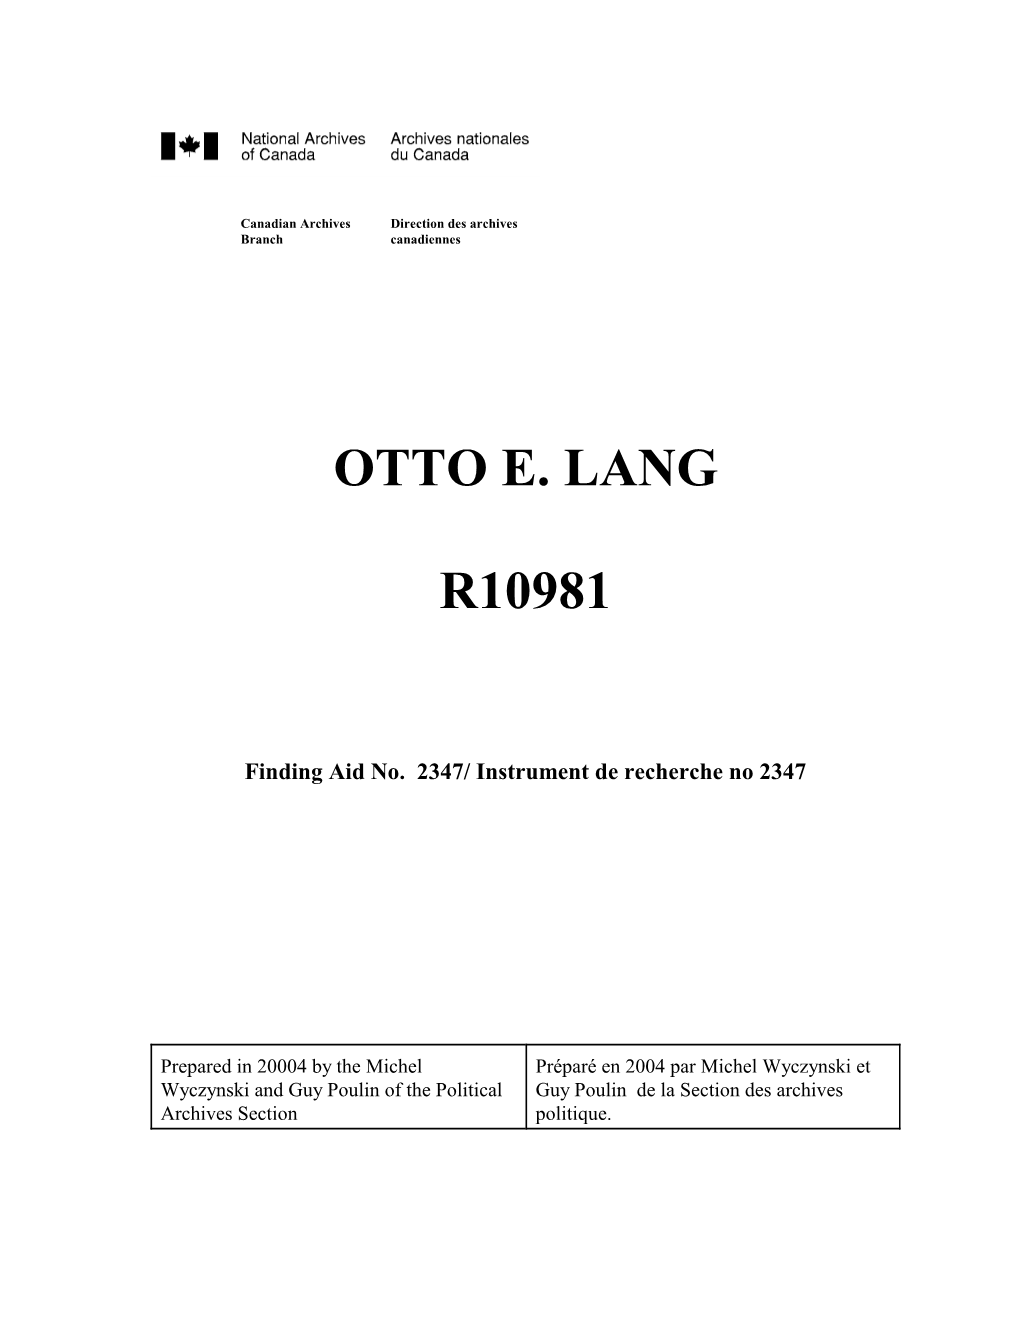 OTTO E. LANG R10981 Container File Subject Date